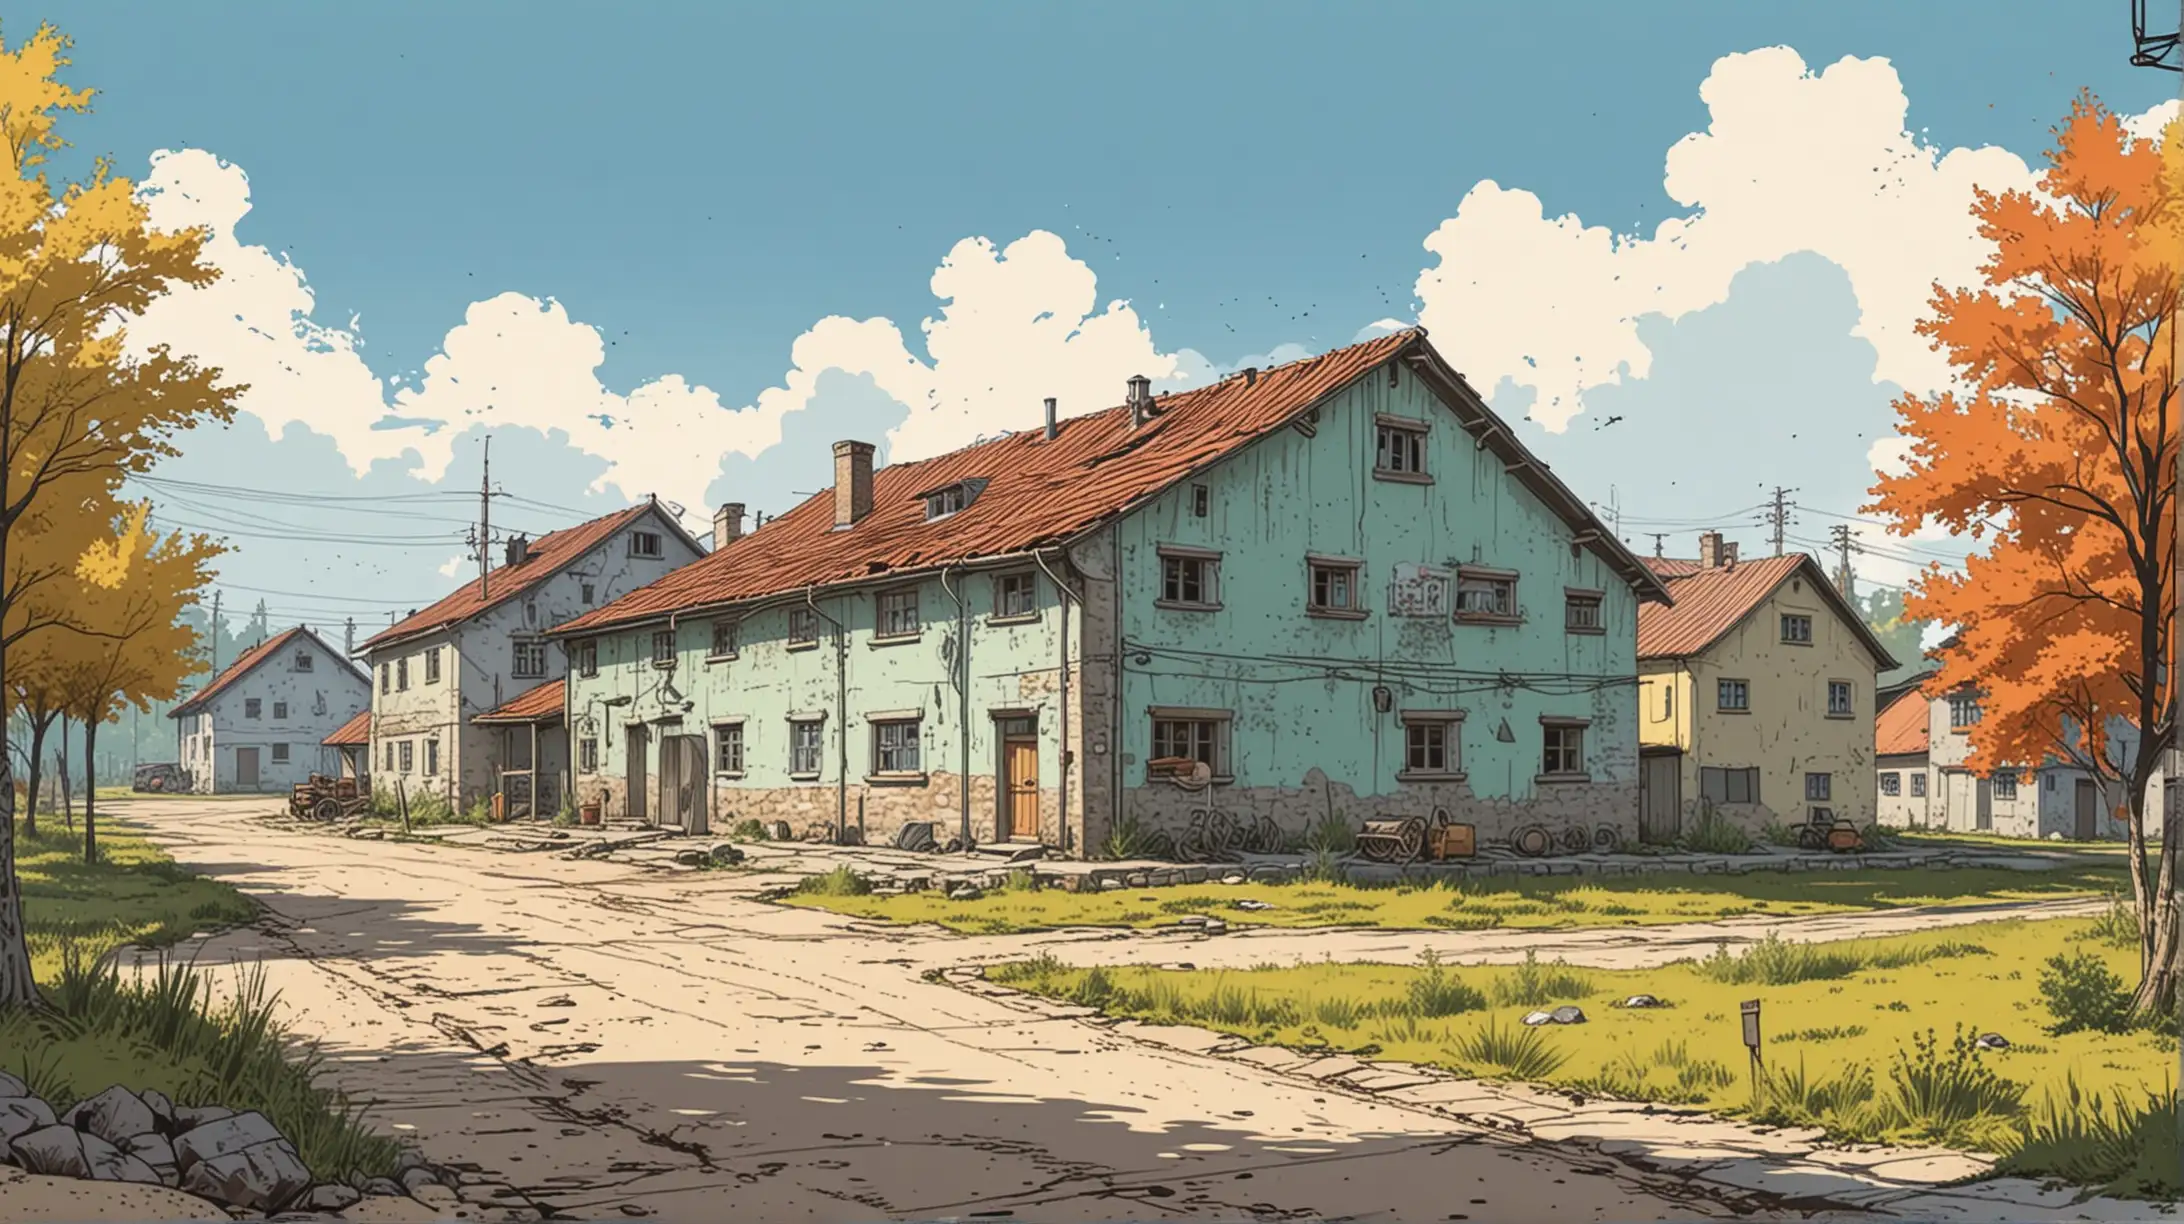 Building of provision production center hidden in village, ww2 setting drawn in comic style colored